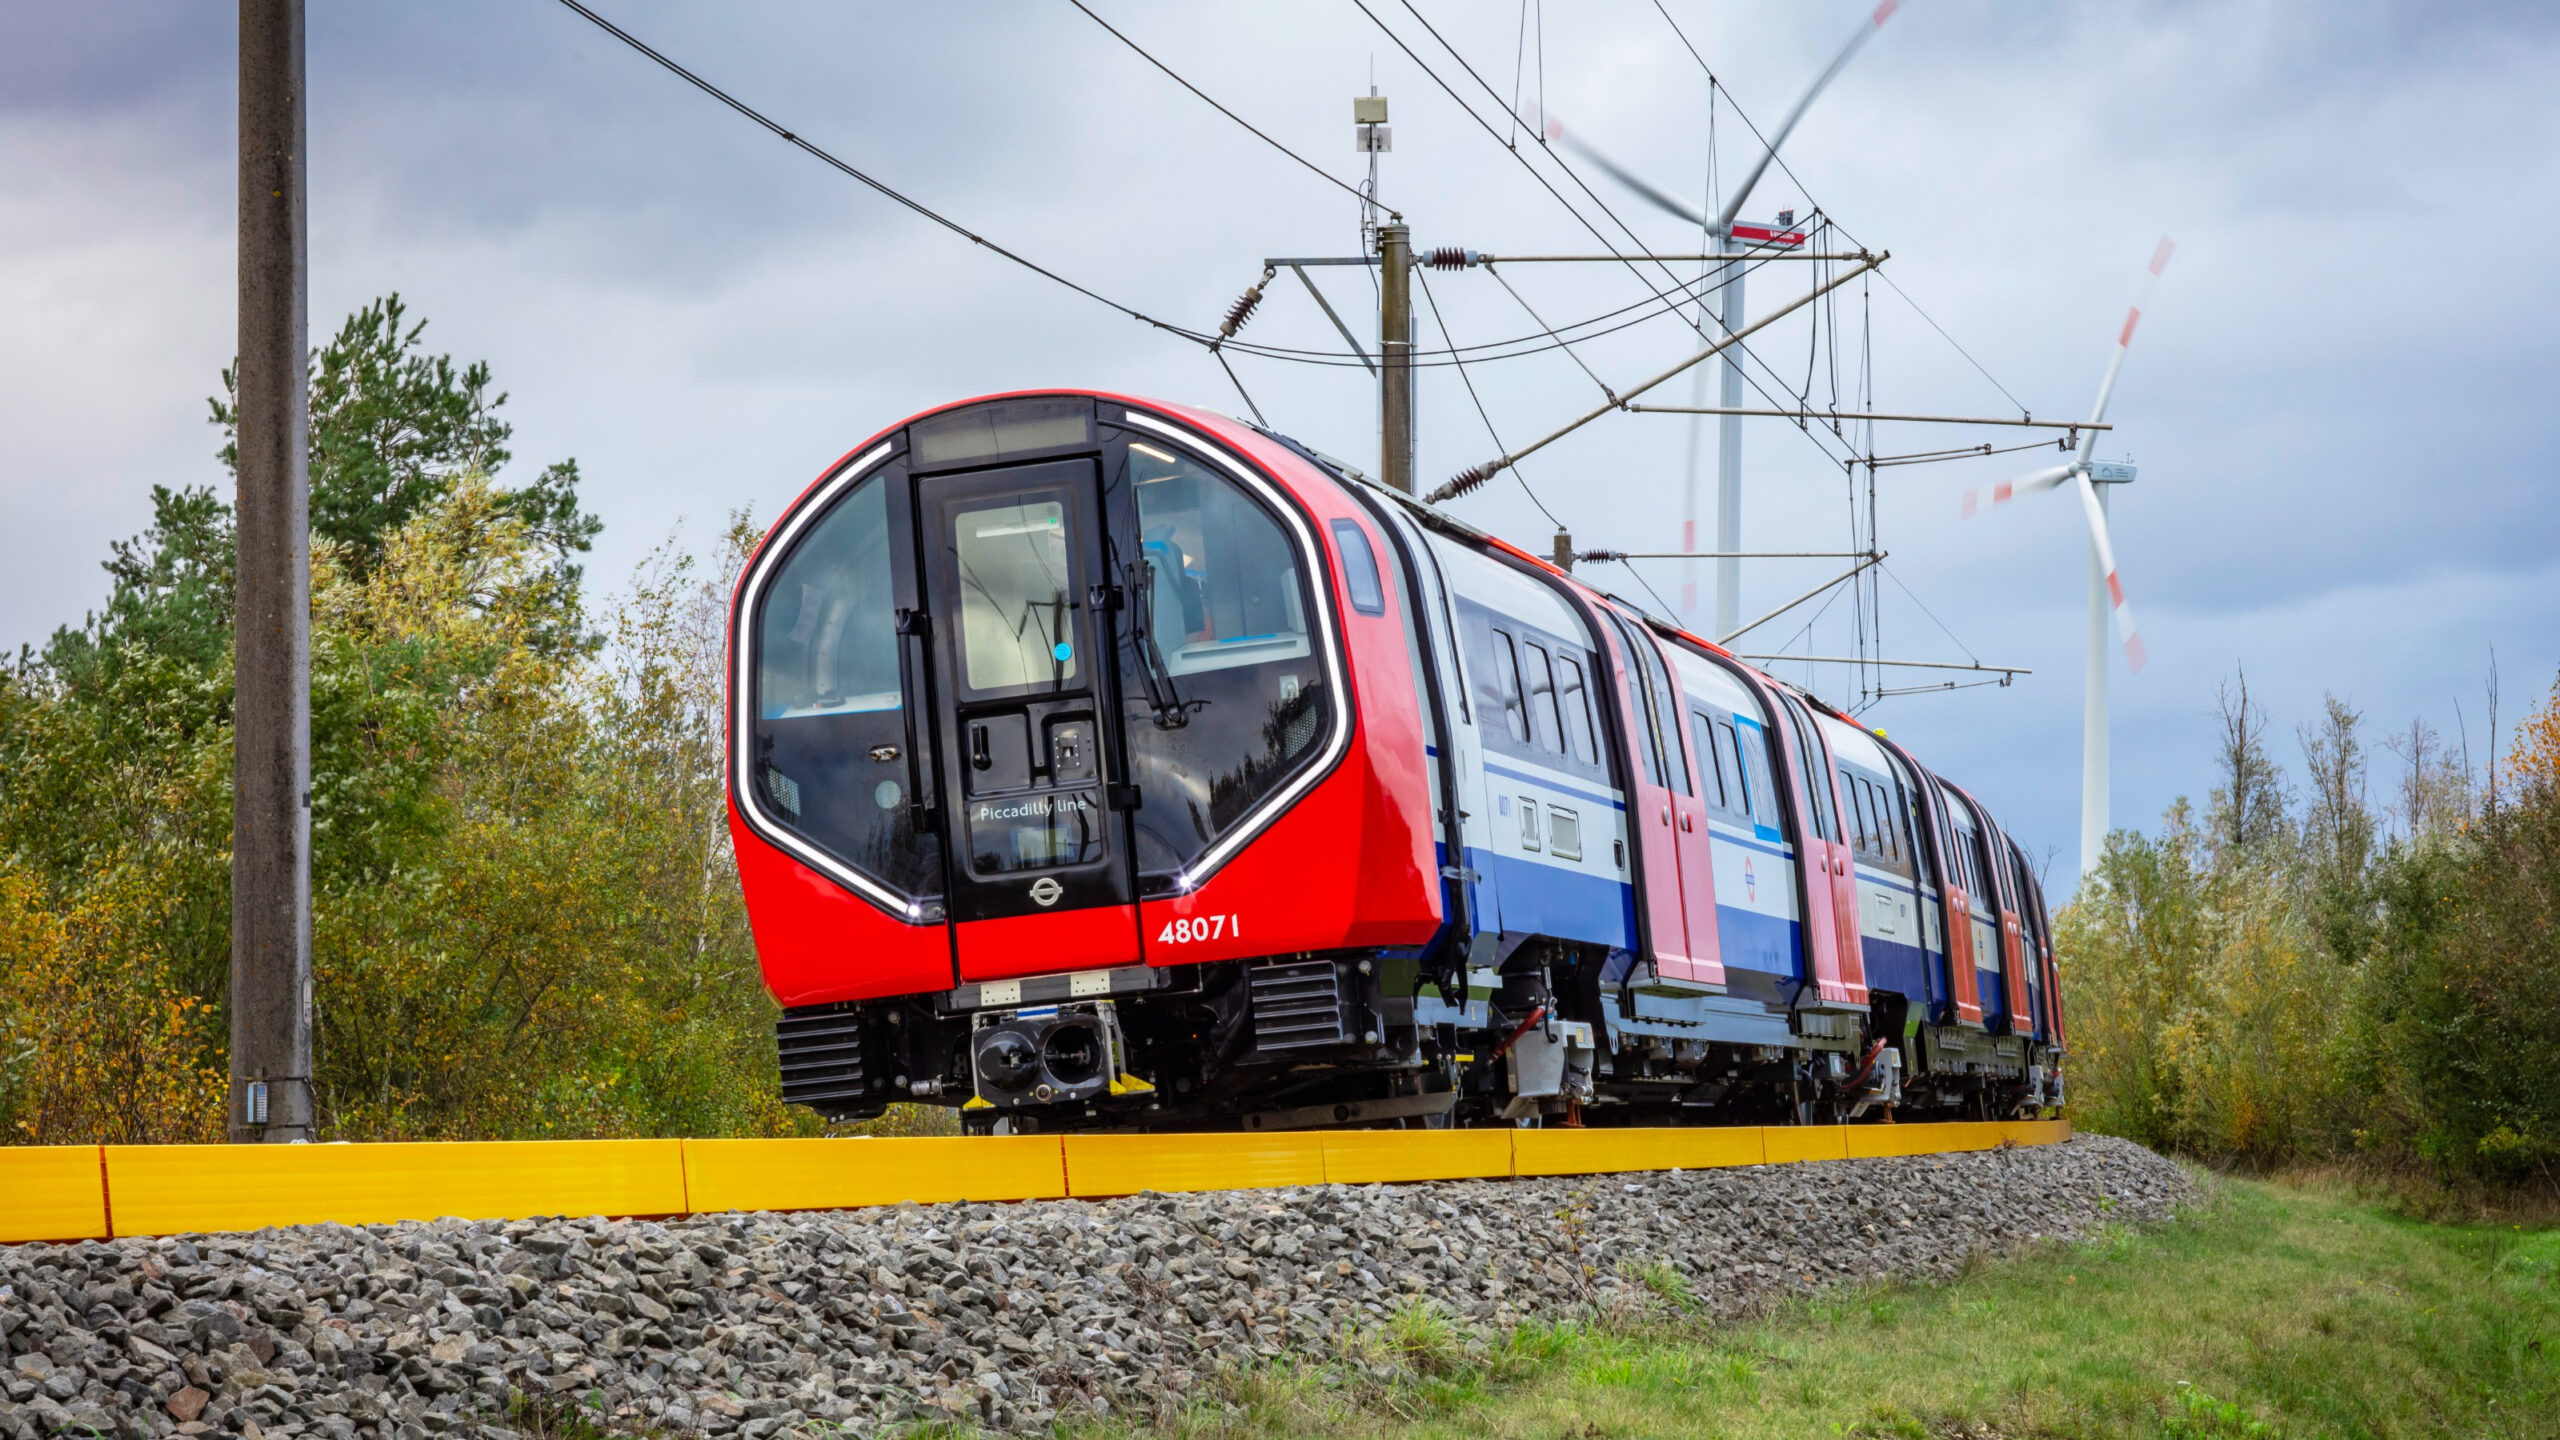 A new Piccadilly line test train